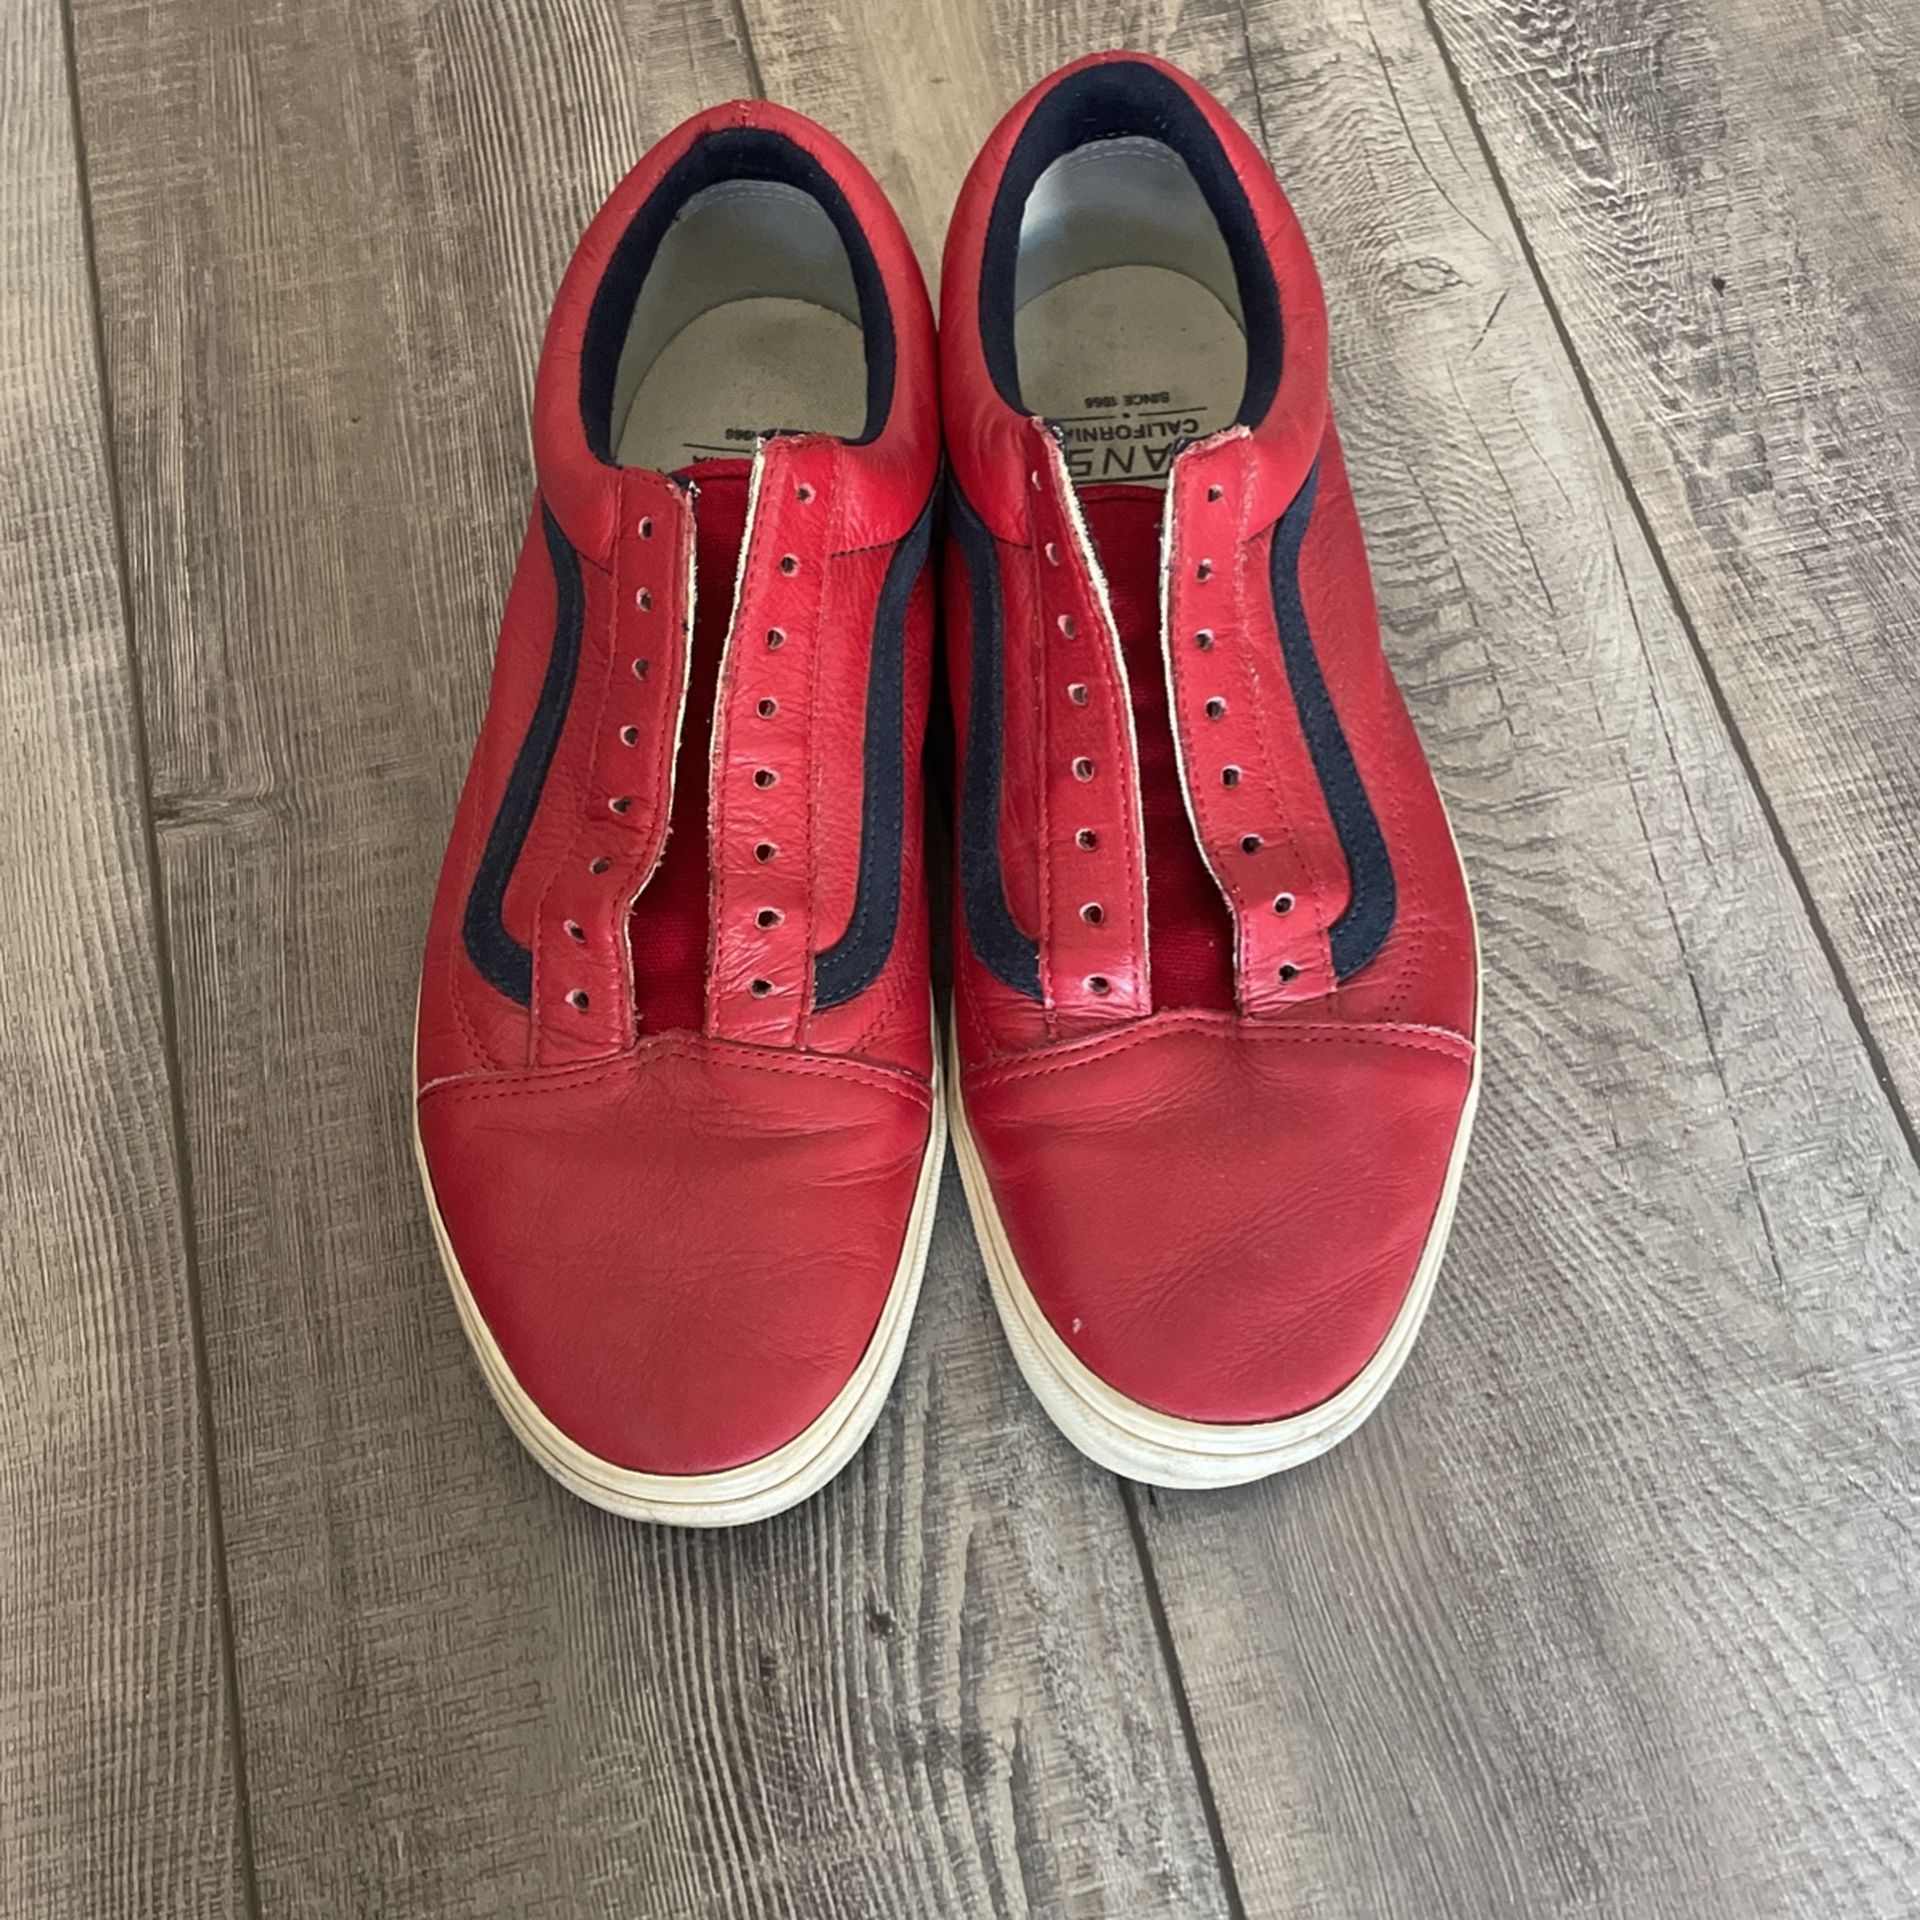 Vans Red Leather Size 11